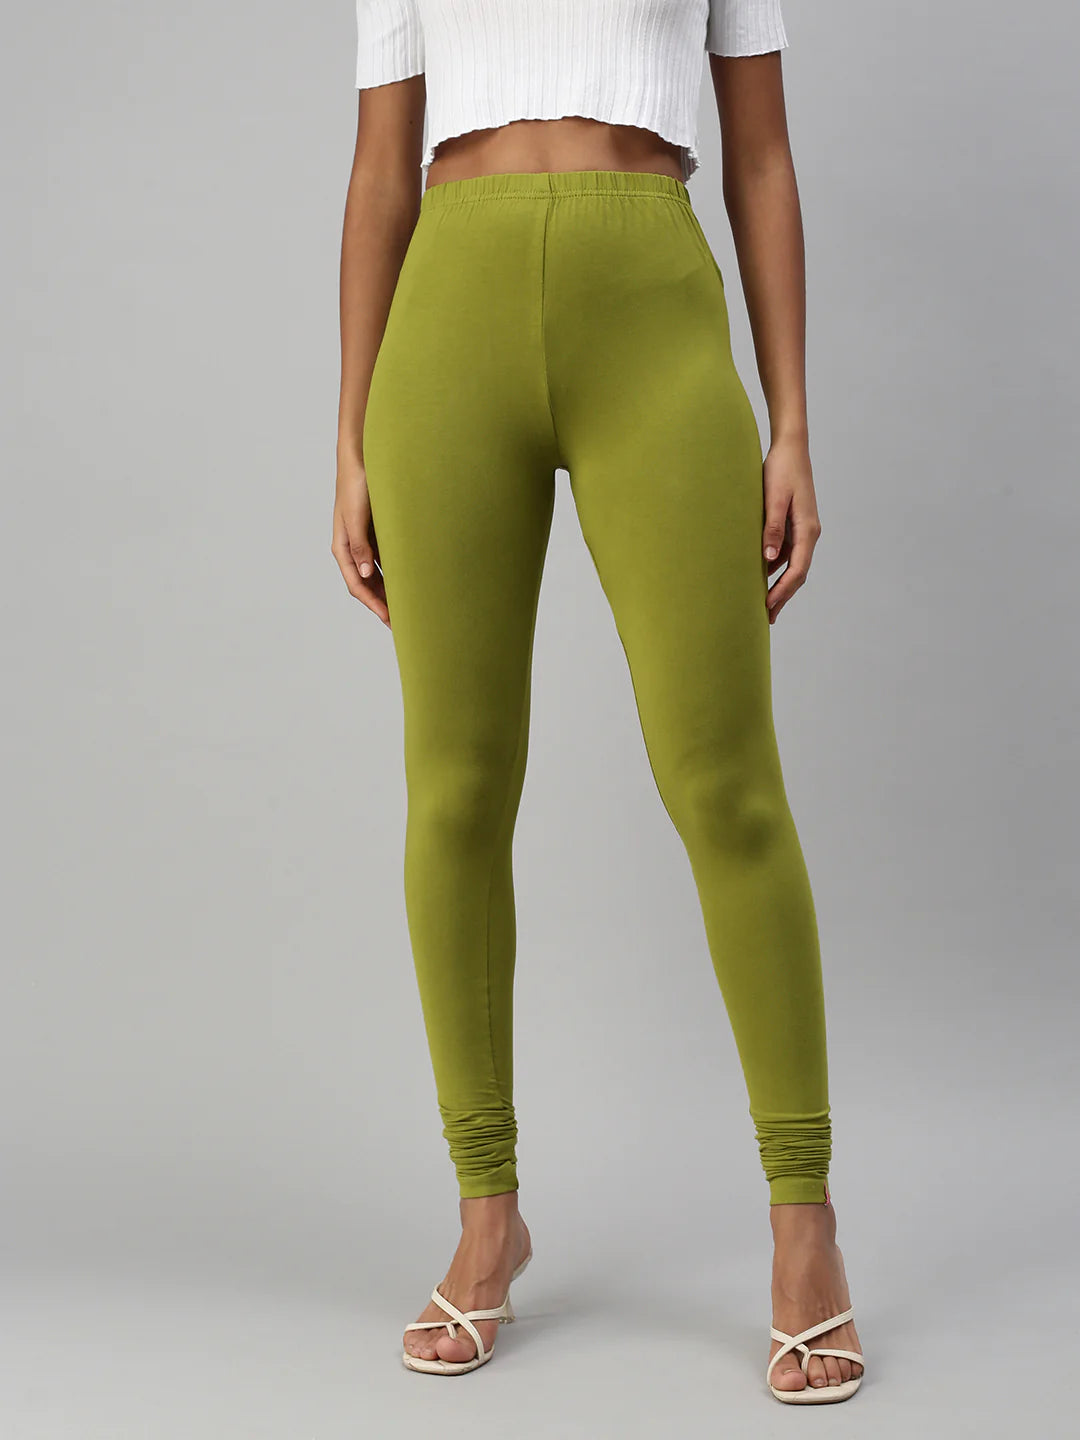 Prisma Ankle Leggings - S, Shady Lady, Lycra at Rs 199, Mendonsa Colony, Dindigul